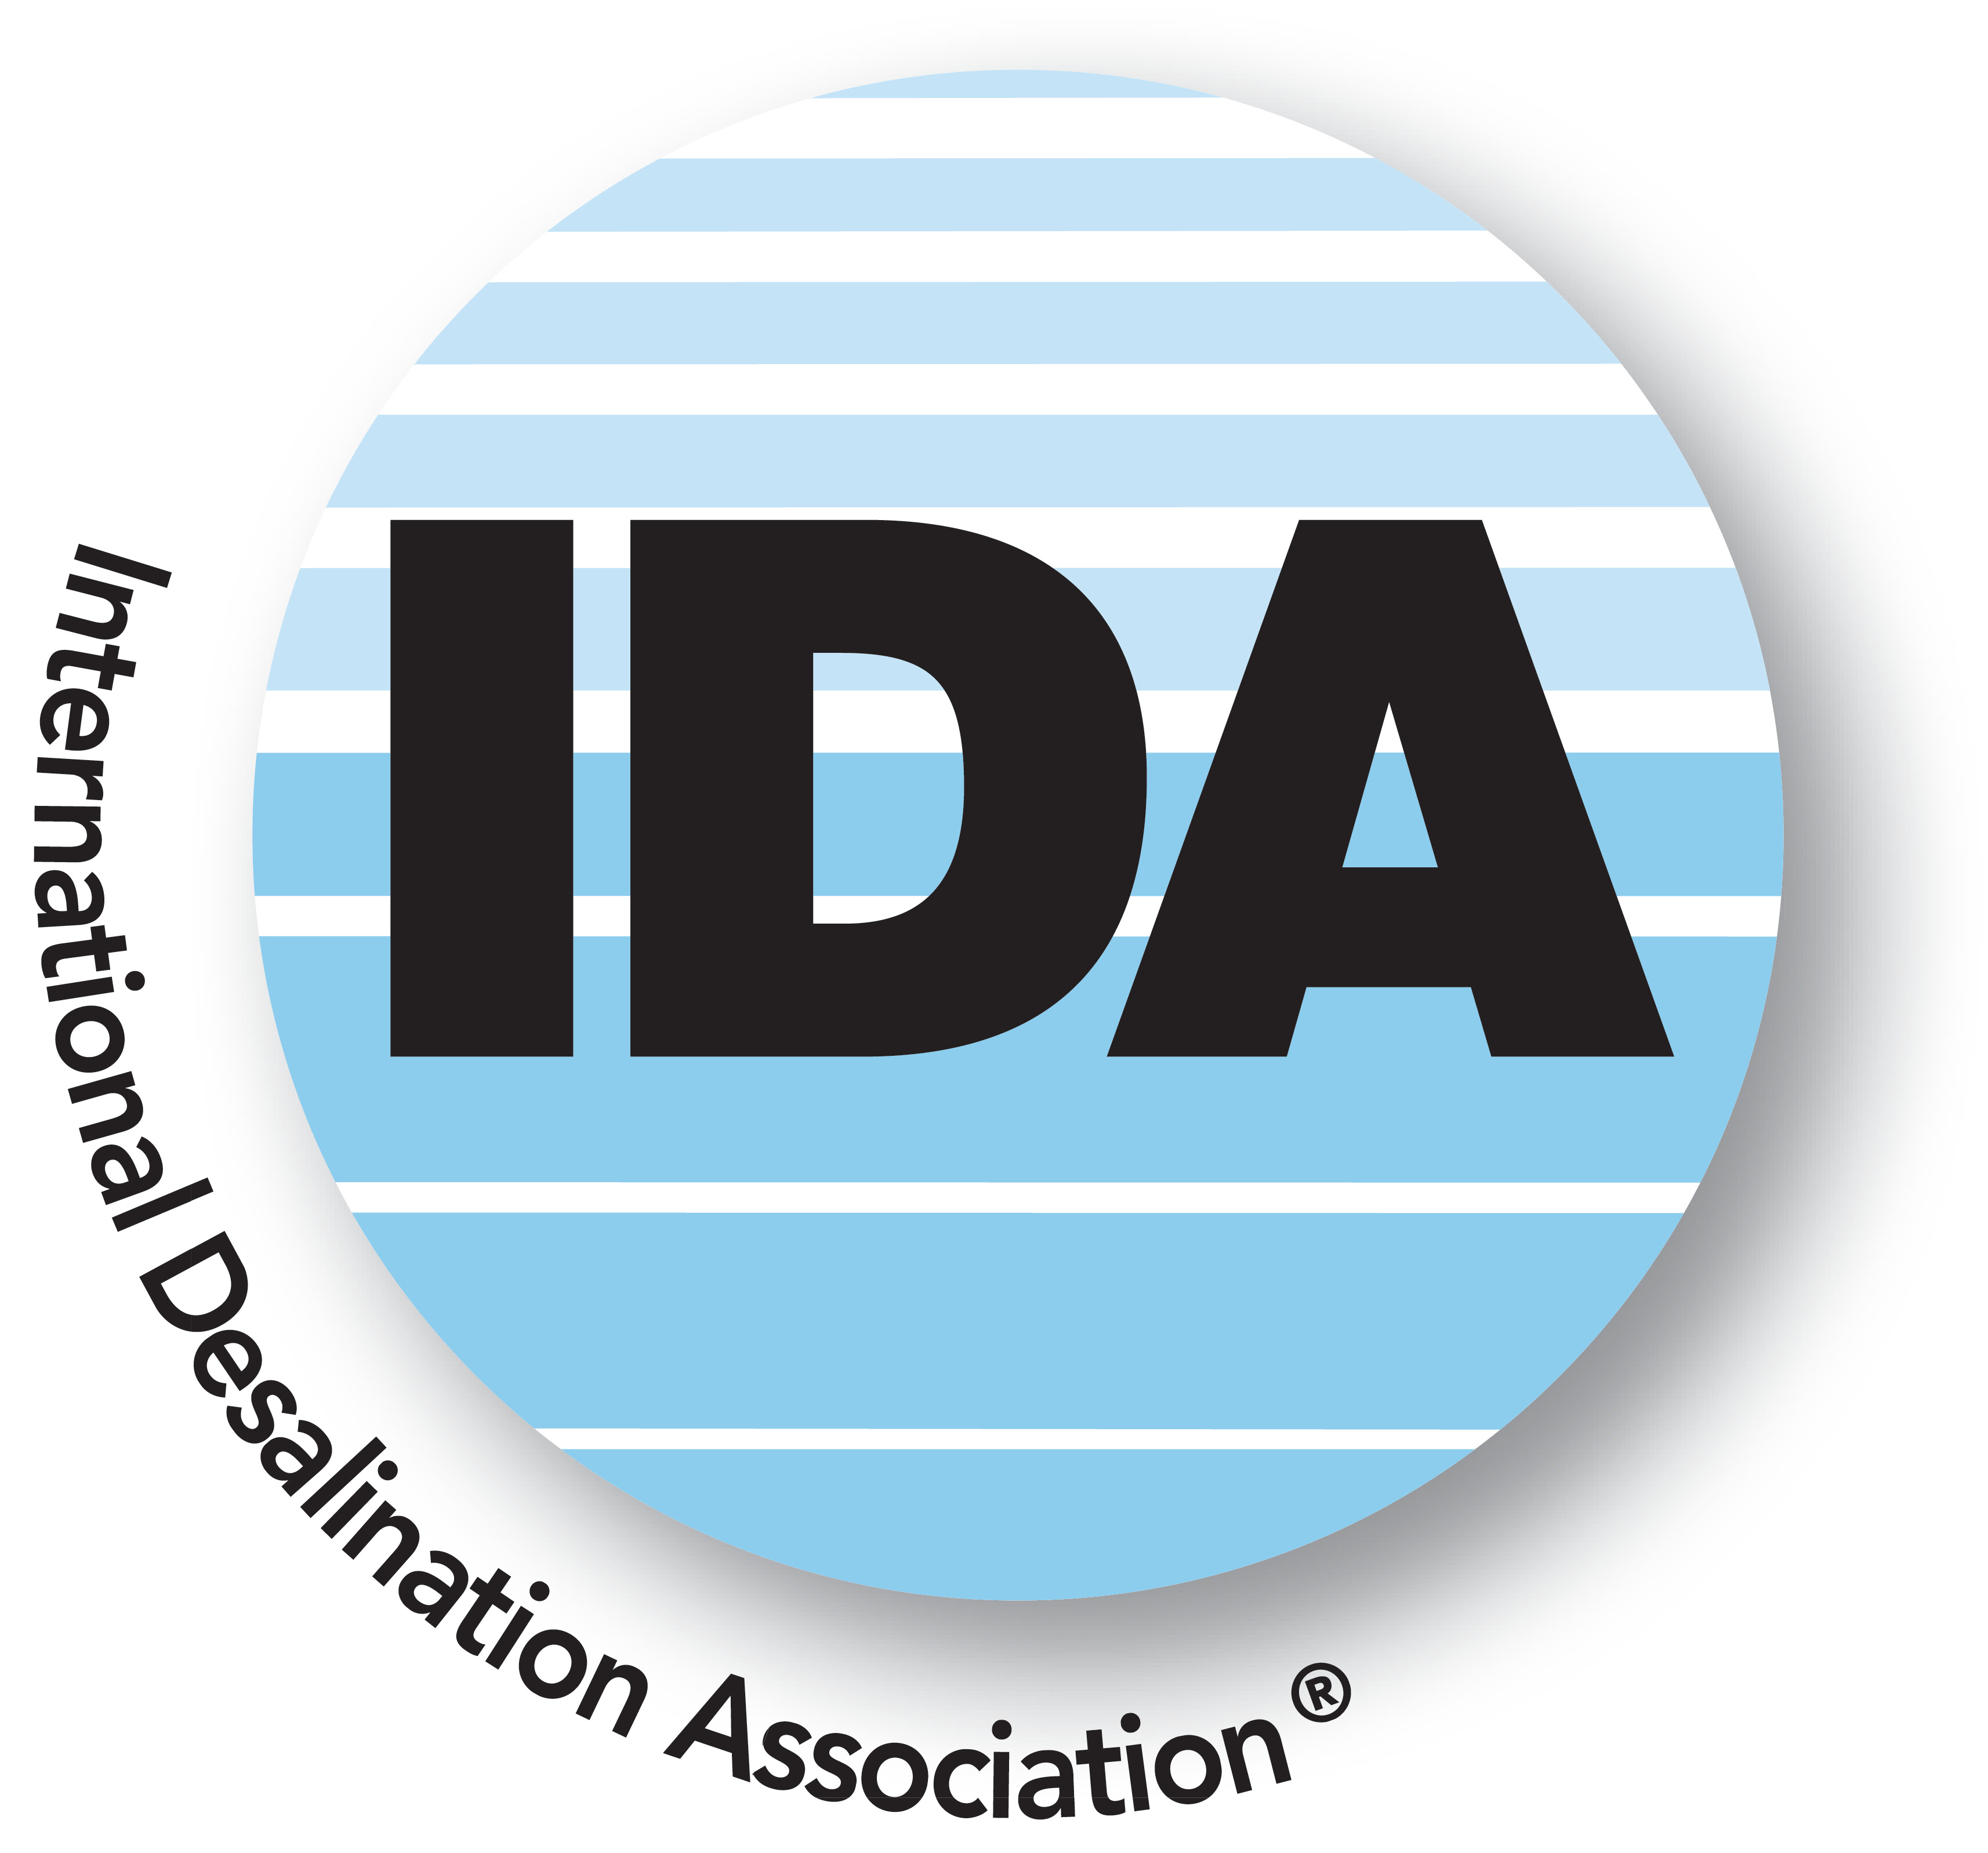 The IDA is offering training opportunities during its World Congress in October.